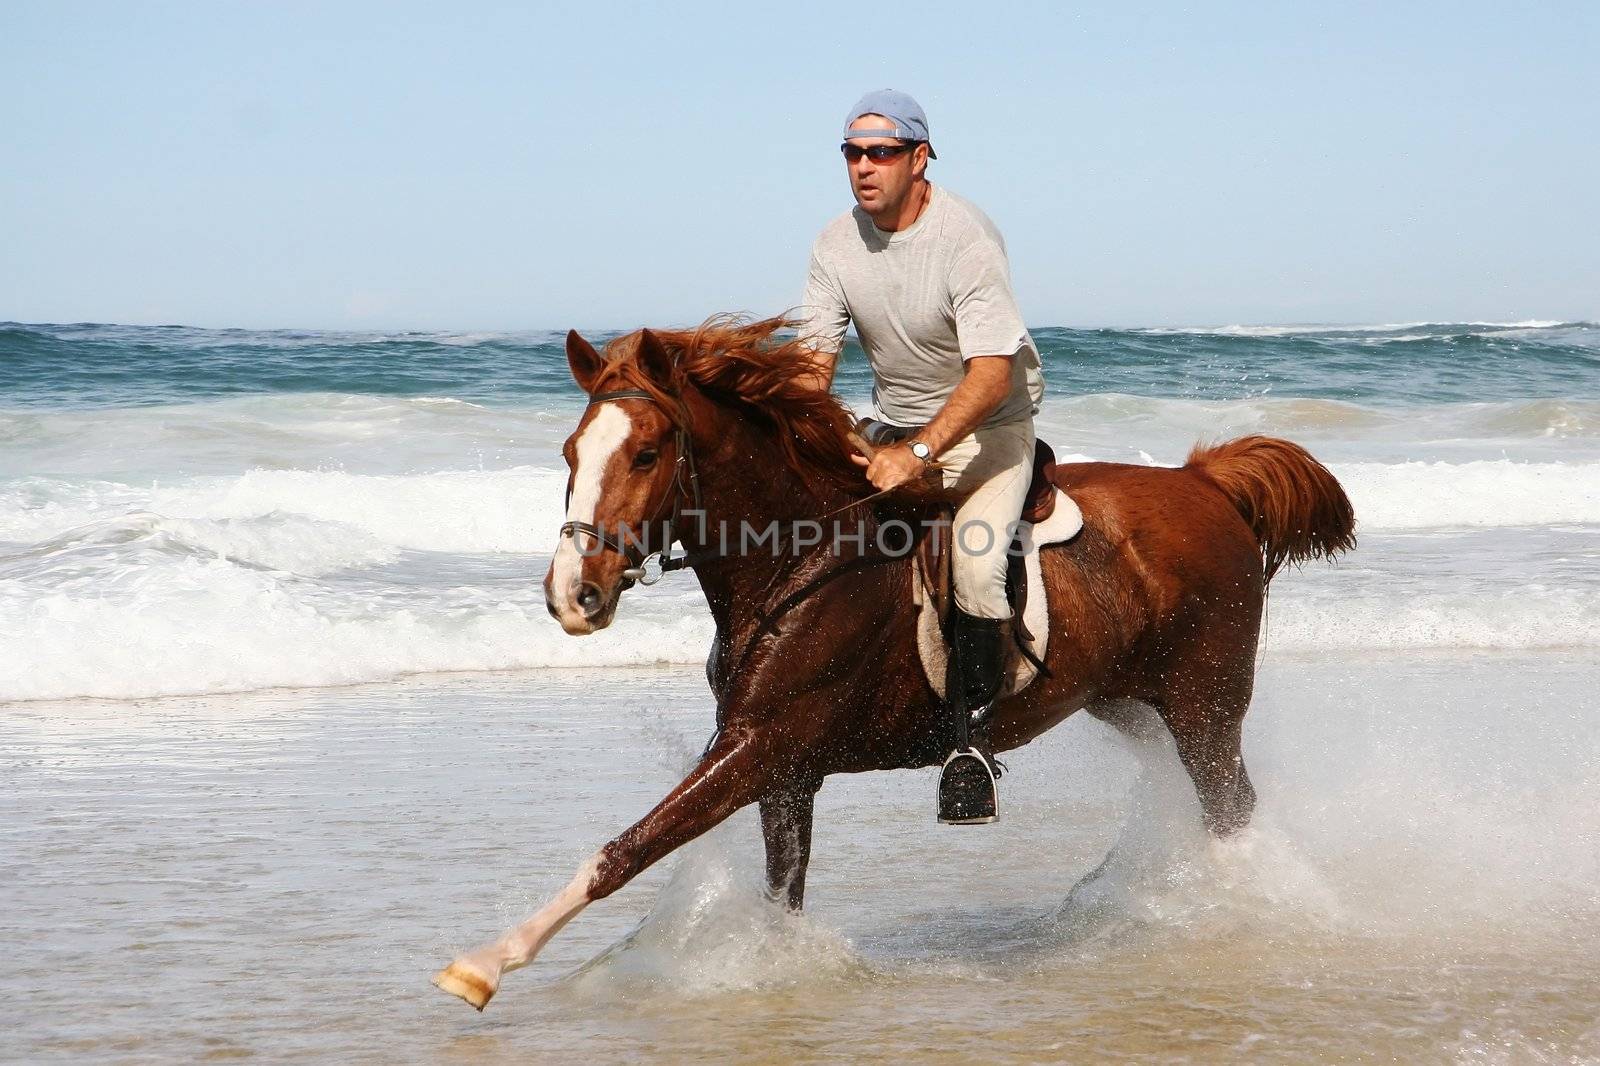 Galloping brown horse and rider in the shallow water at the beach